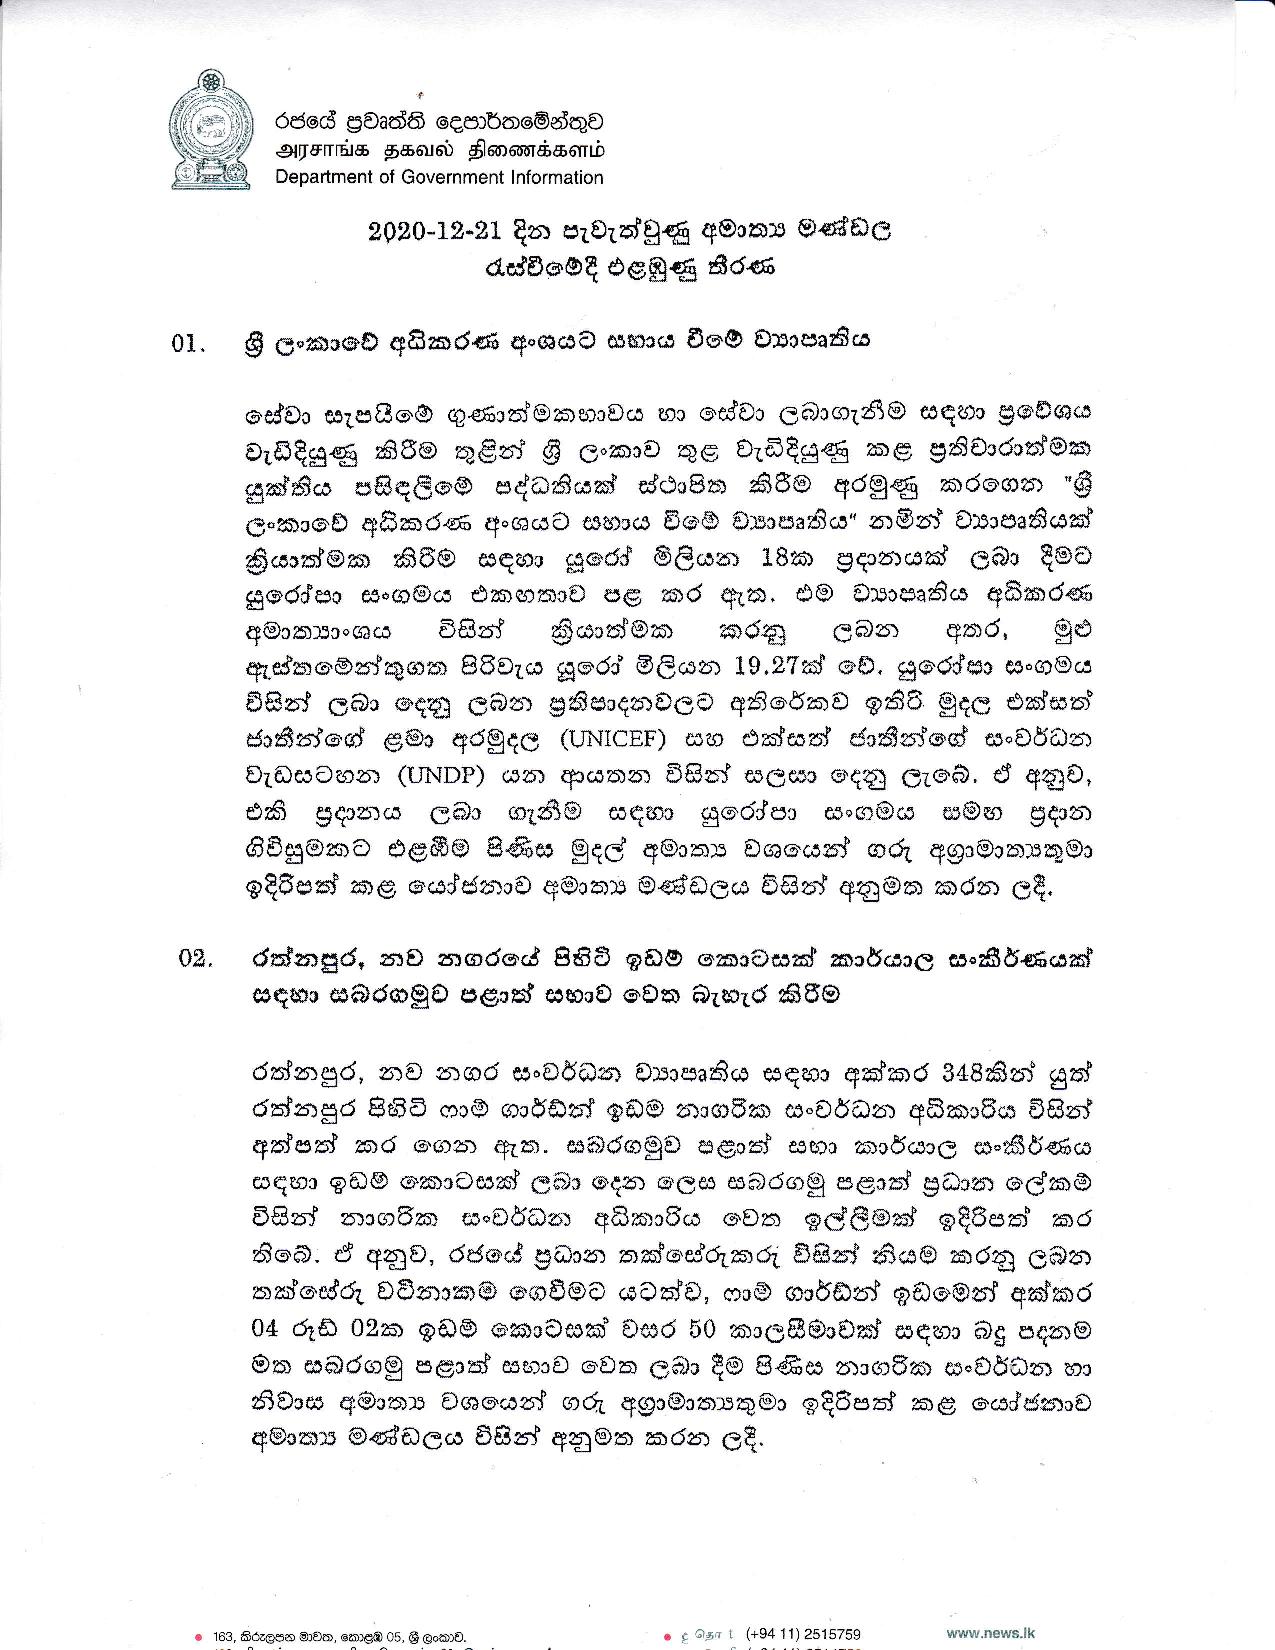 Cabinet Decision on 21.12.2020 page 001